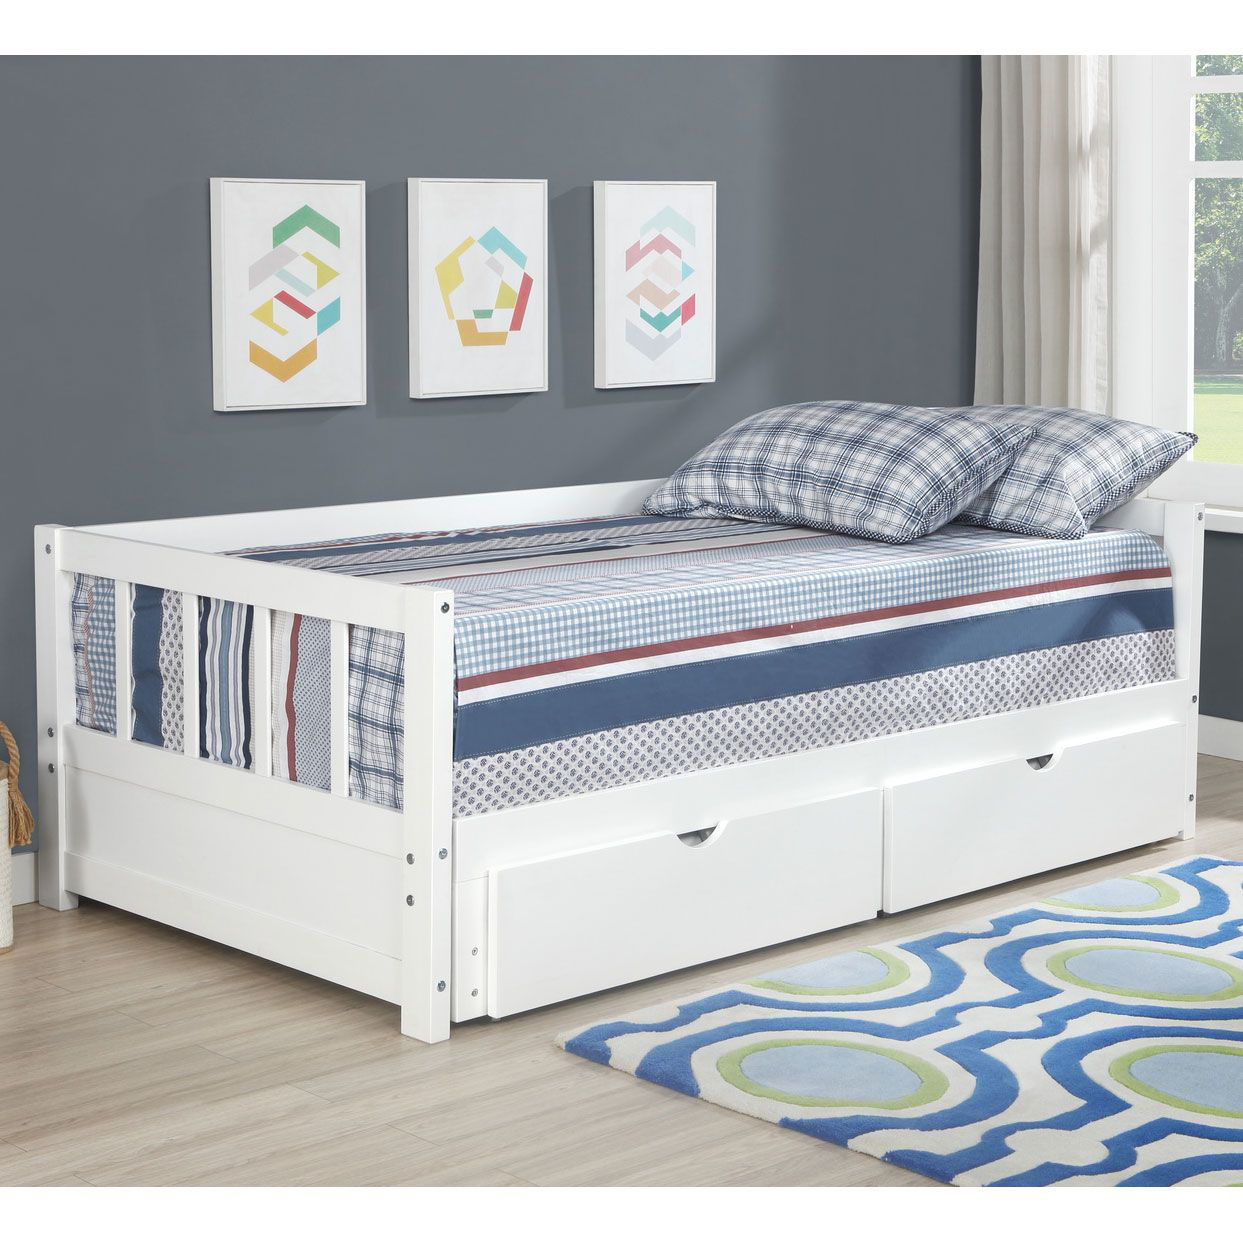 More Like Home: The Stack-a-Bed (converts from twin to king!)